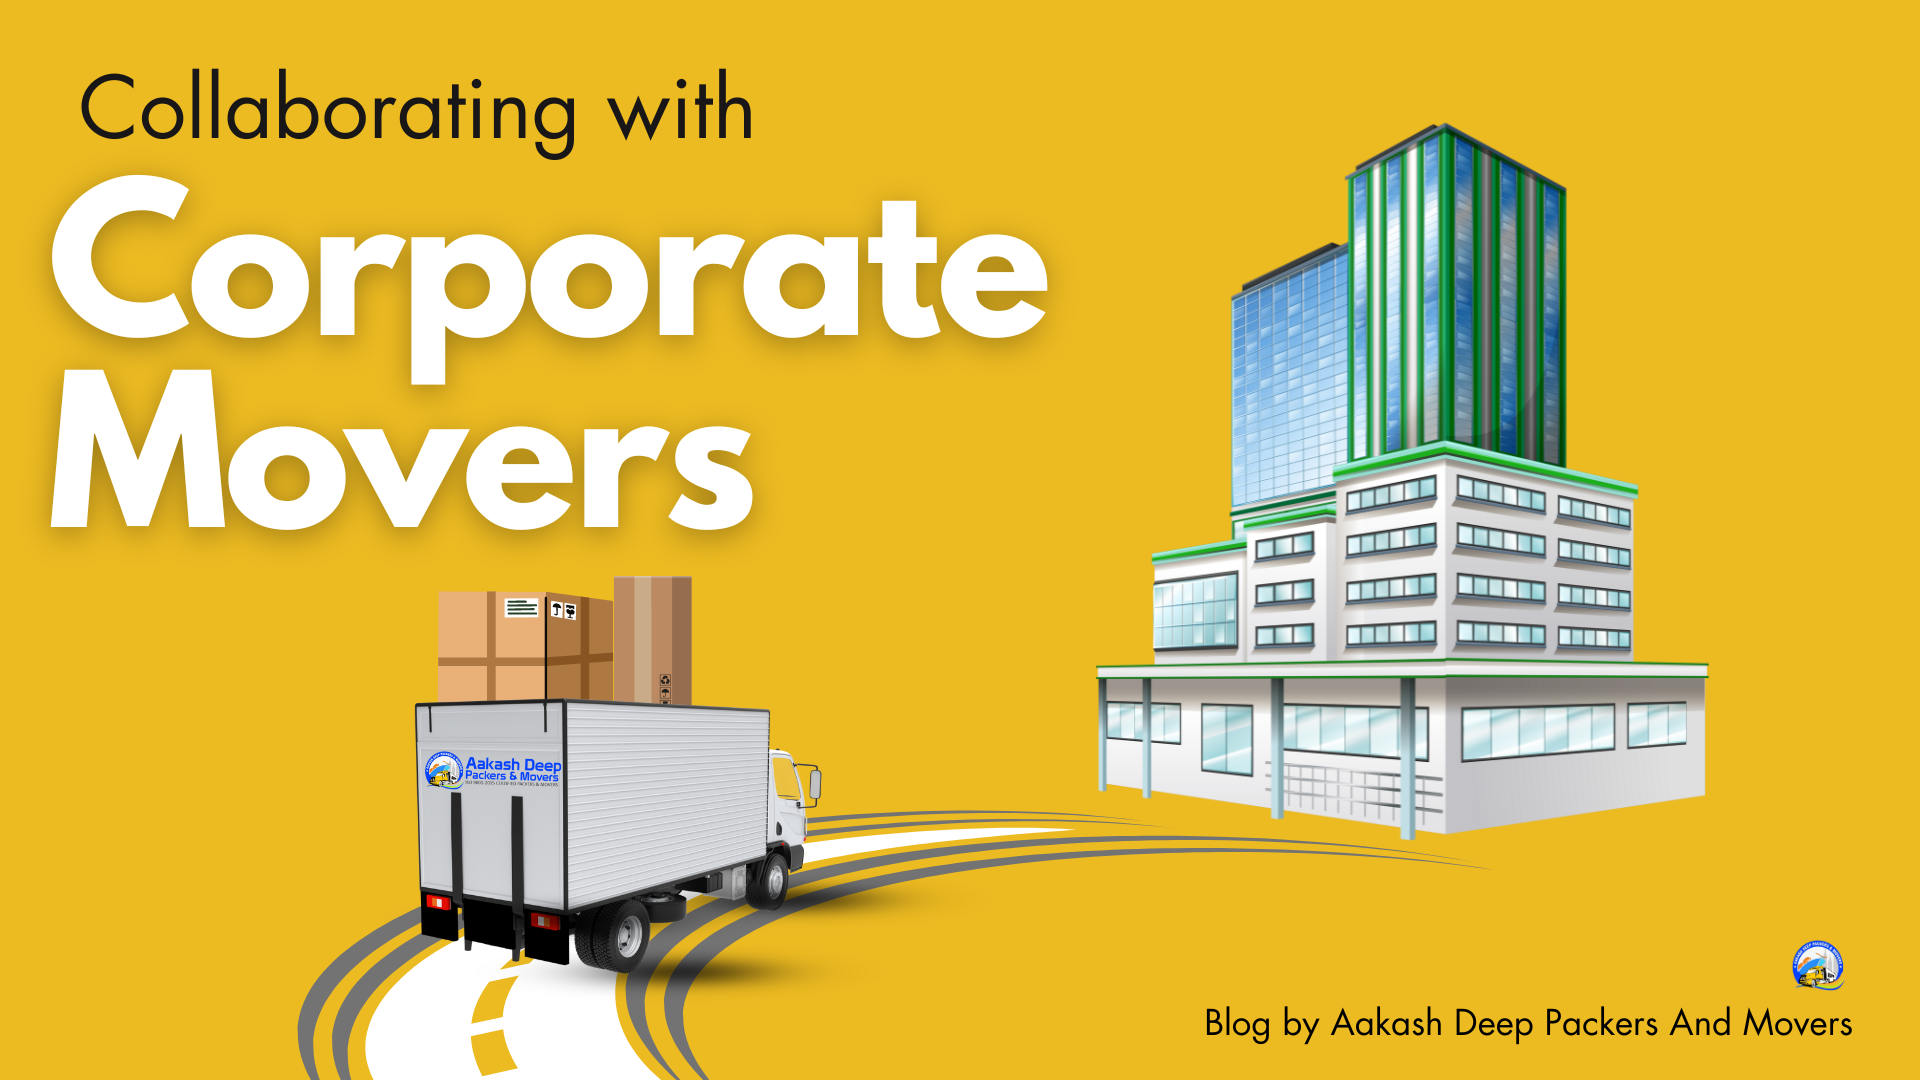 Collaborating with Corporate Movers: What to Look for in a Corporate Moving Company